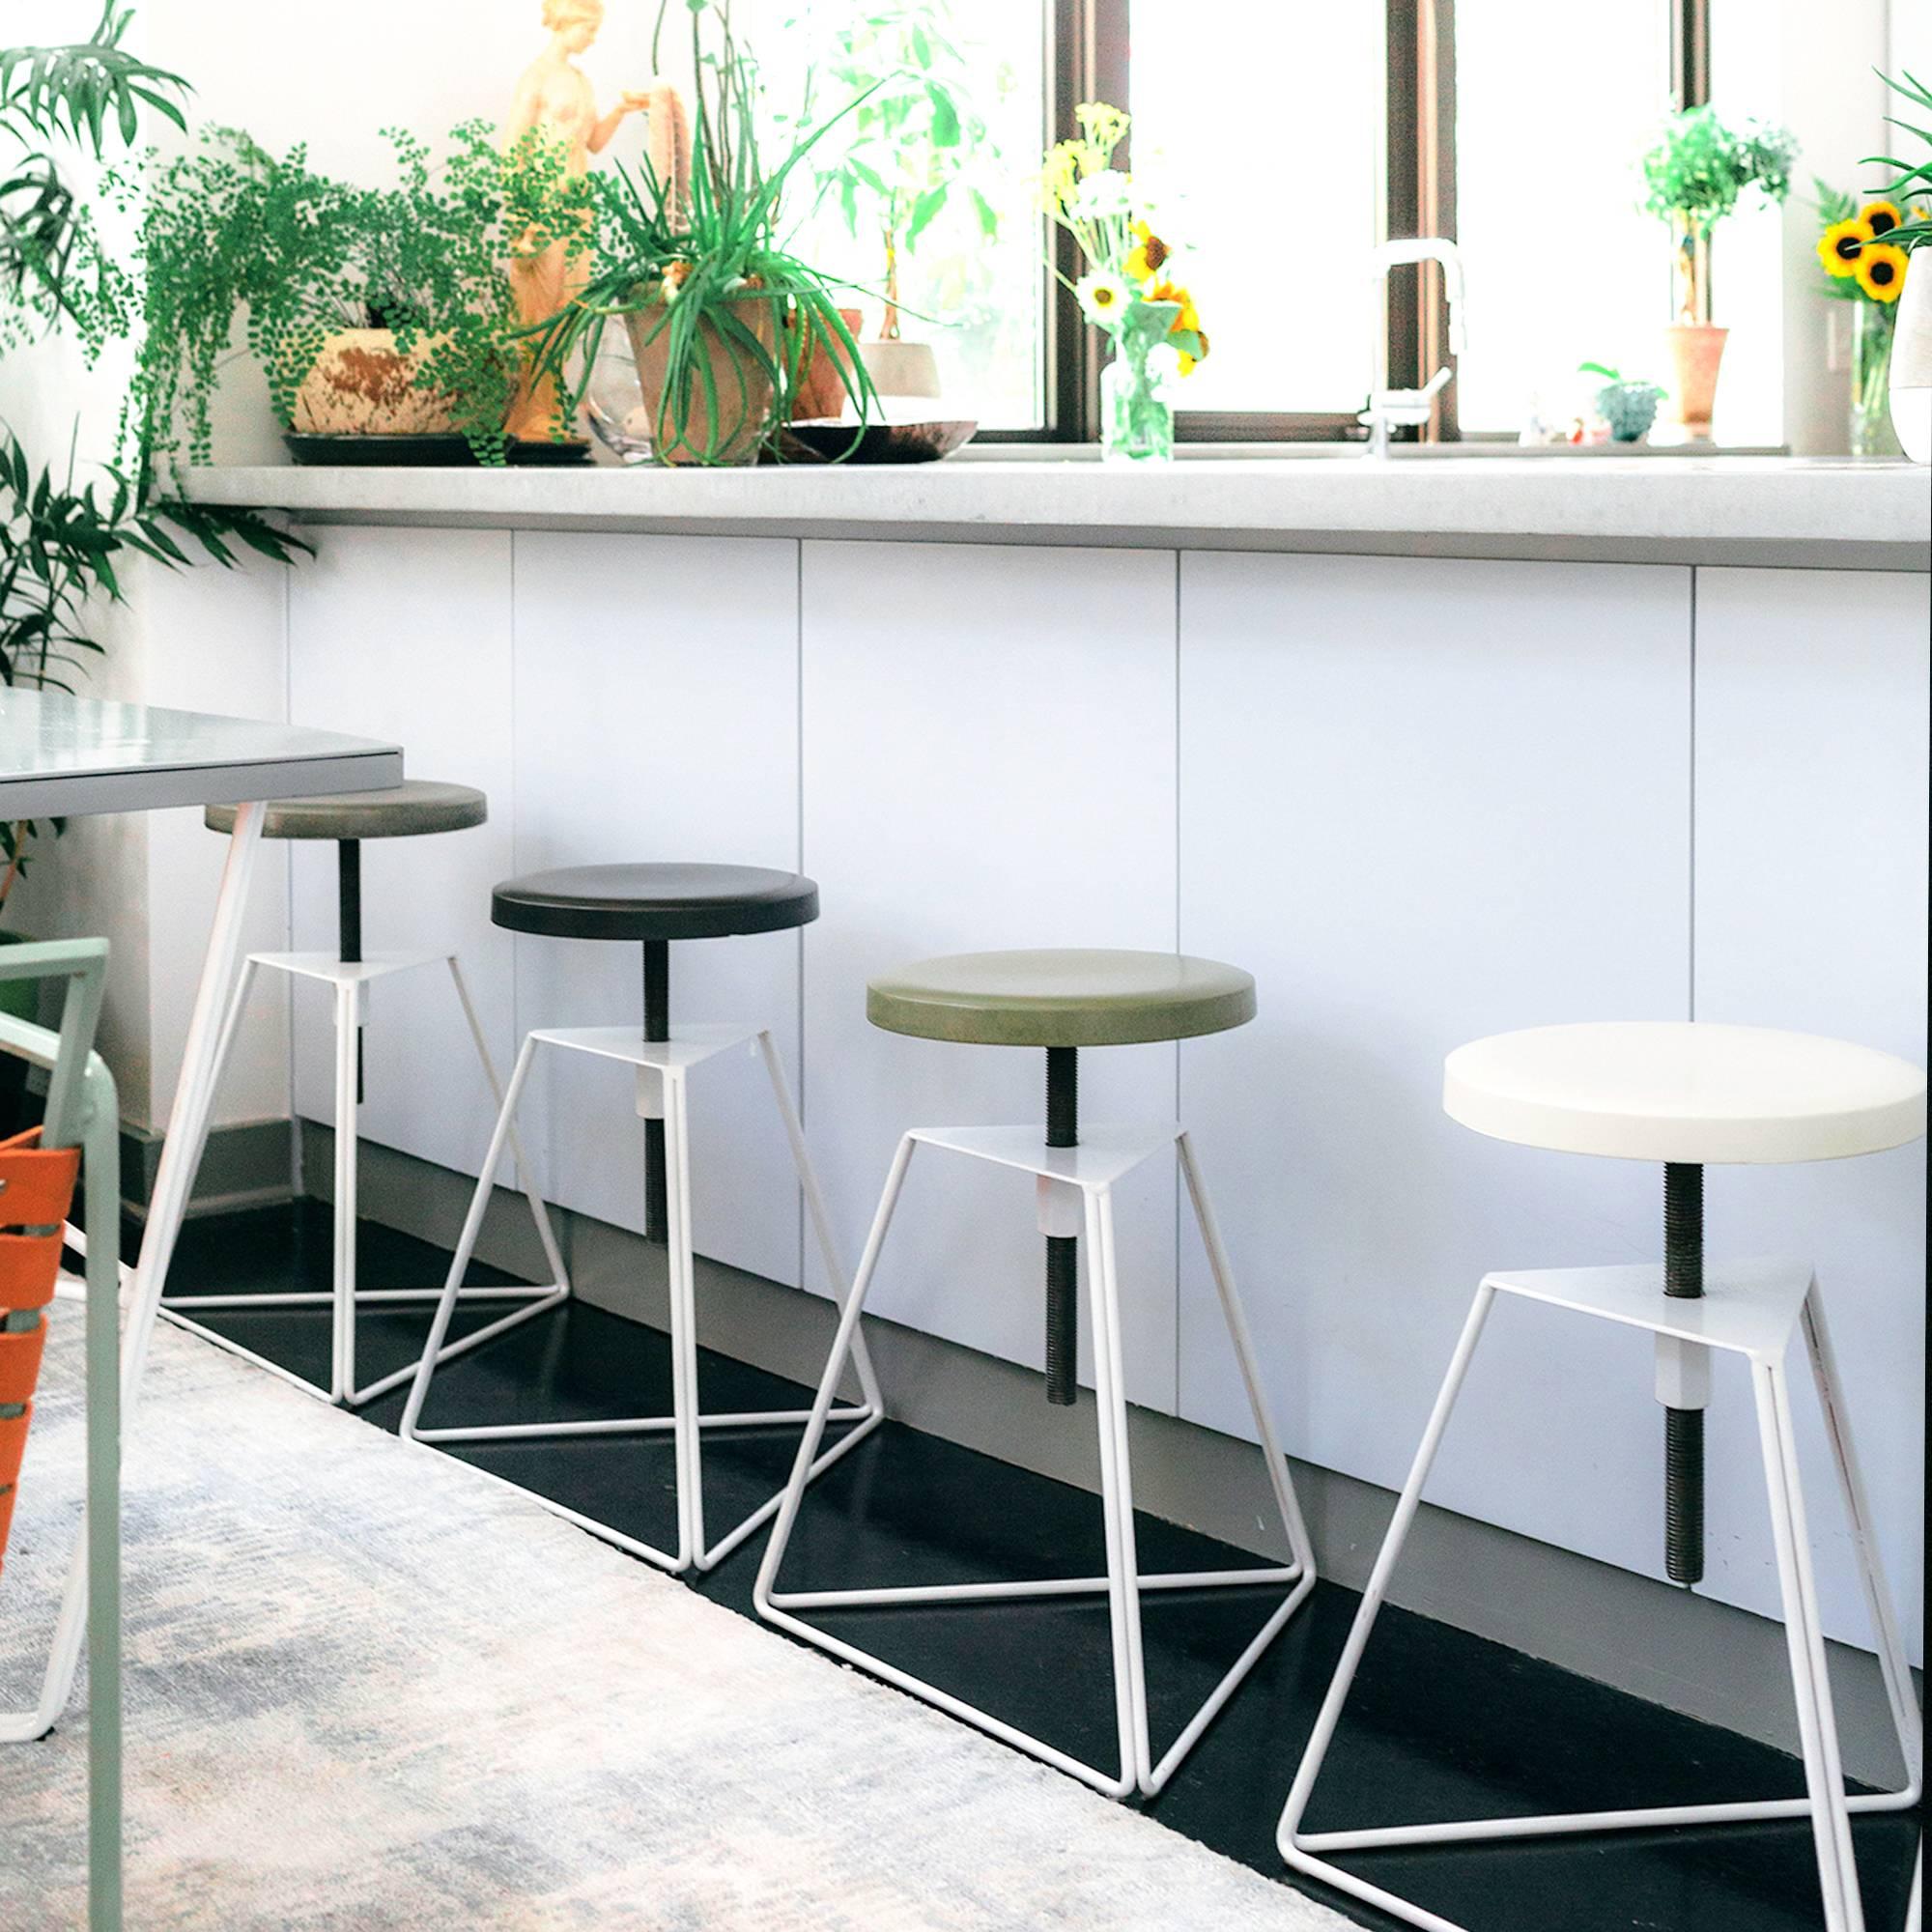 The Camp stool is the contemporary embodiment of the Classic piano stool. Its solid steel frame provides a solid foundation for the seat to spin and find the perfect height for any occasion. Arrange a selection of different seat and frame options